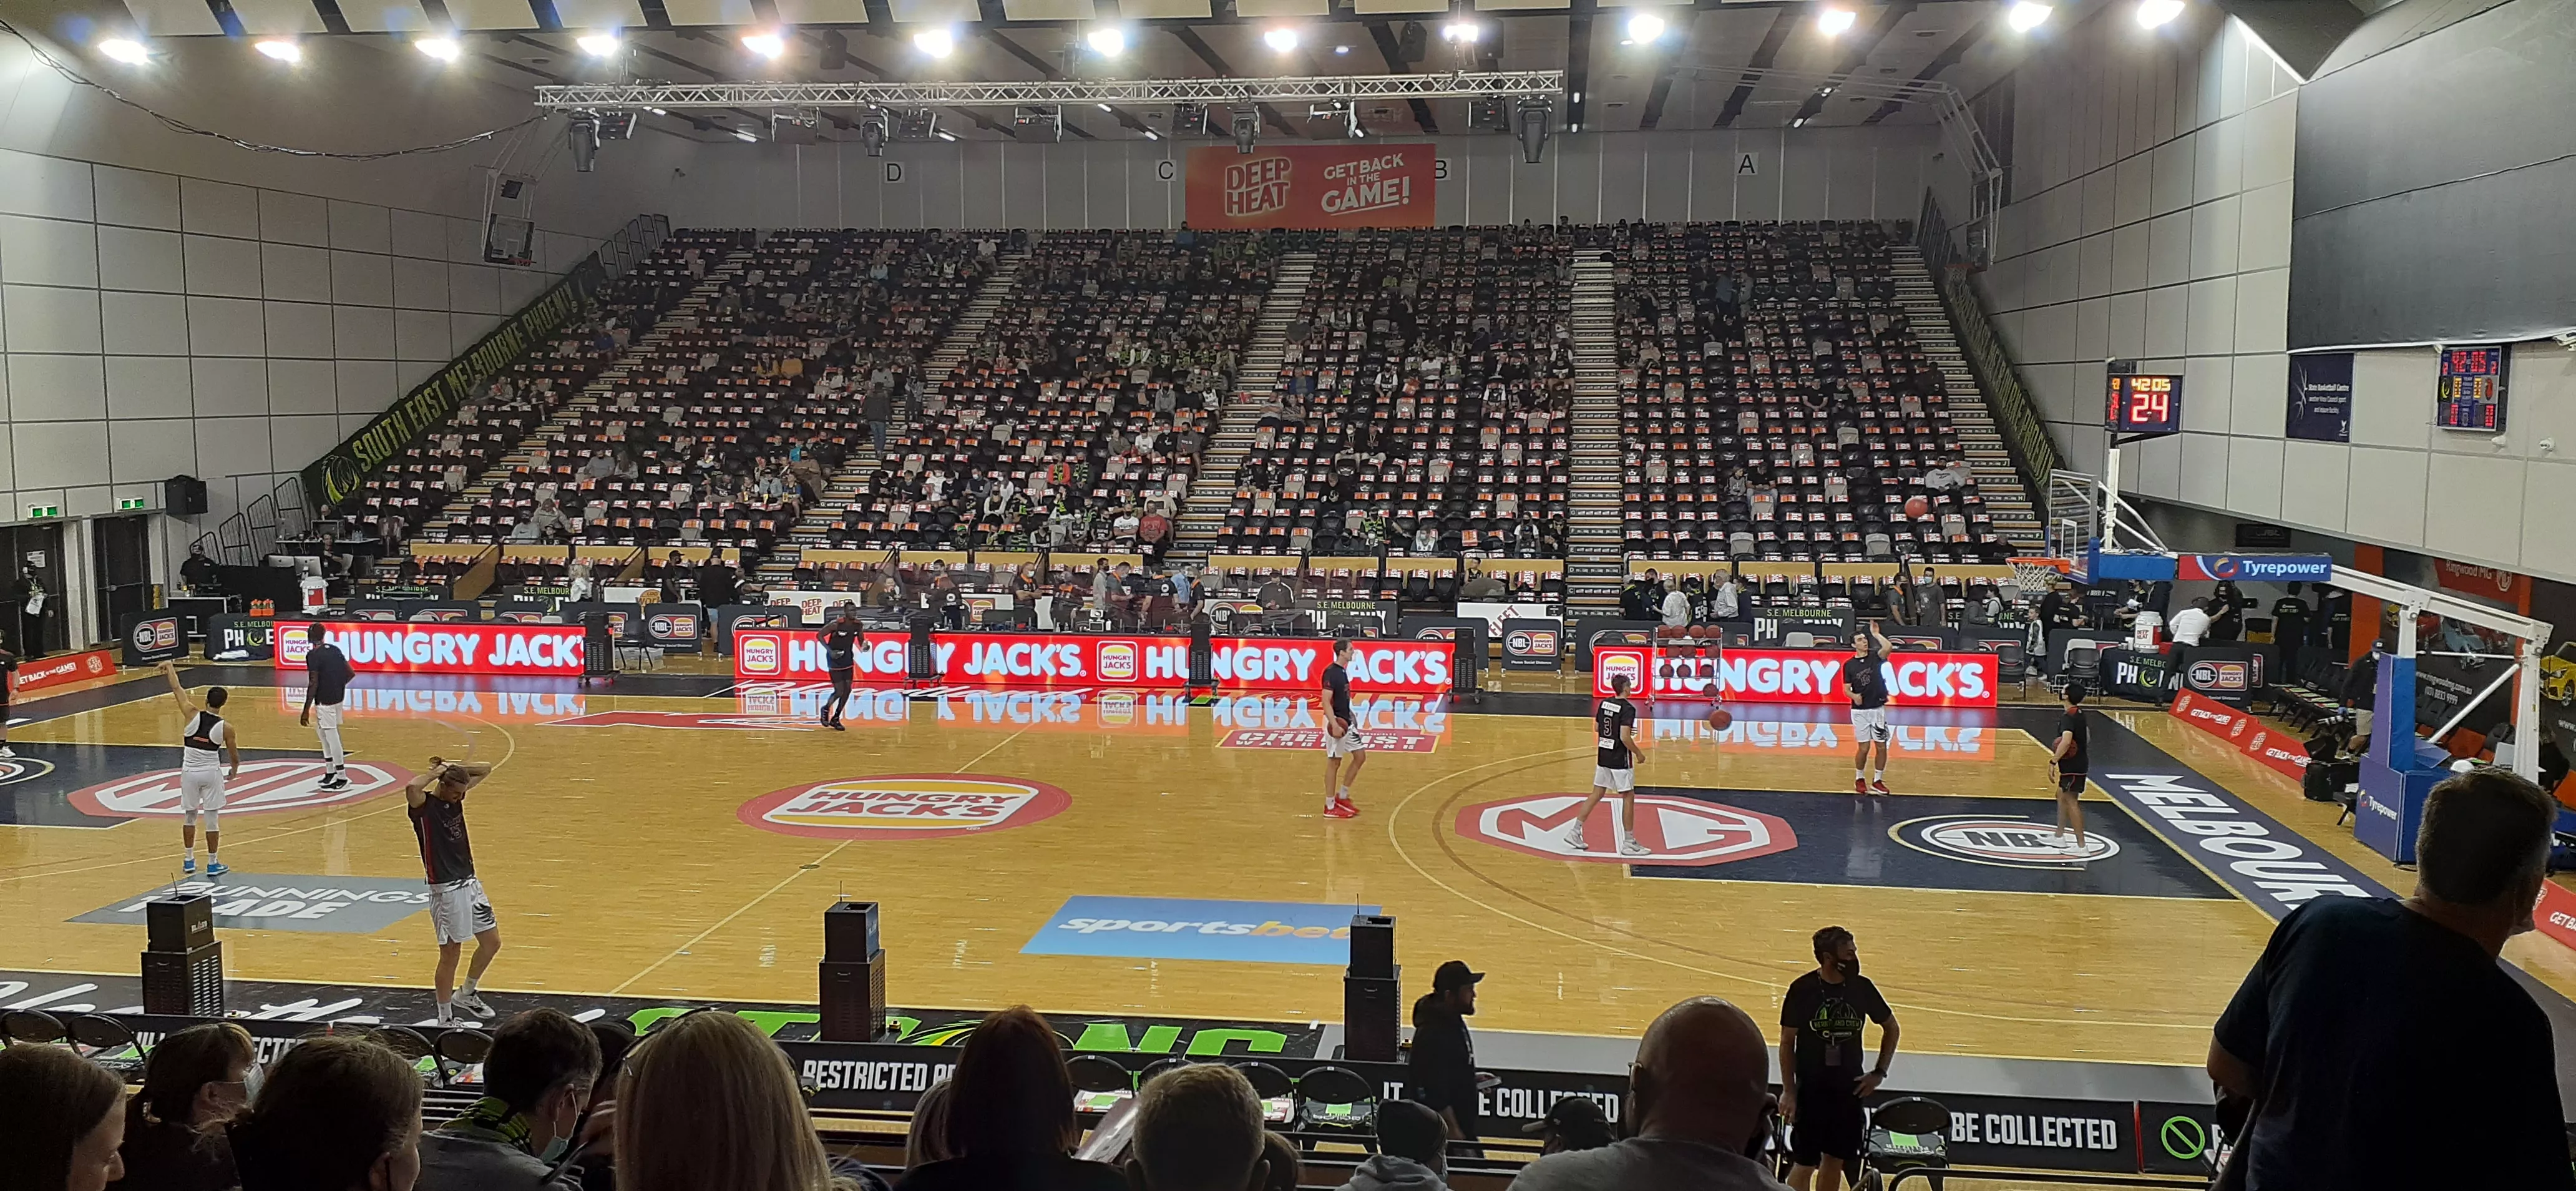 TSB Stadium in New Zealand, Australia and Oceania | Basketball - Rated 3.4